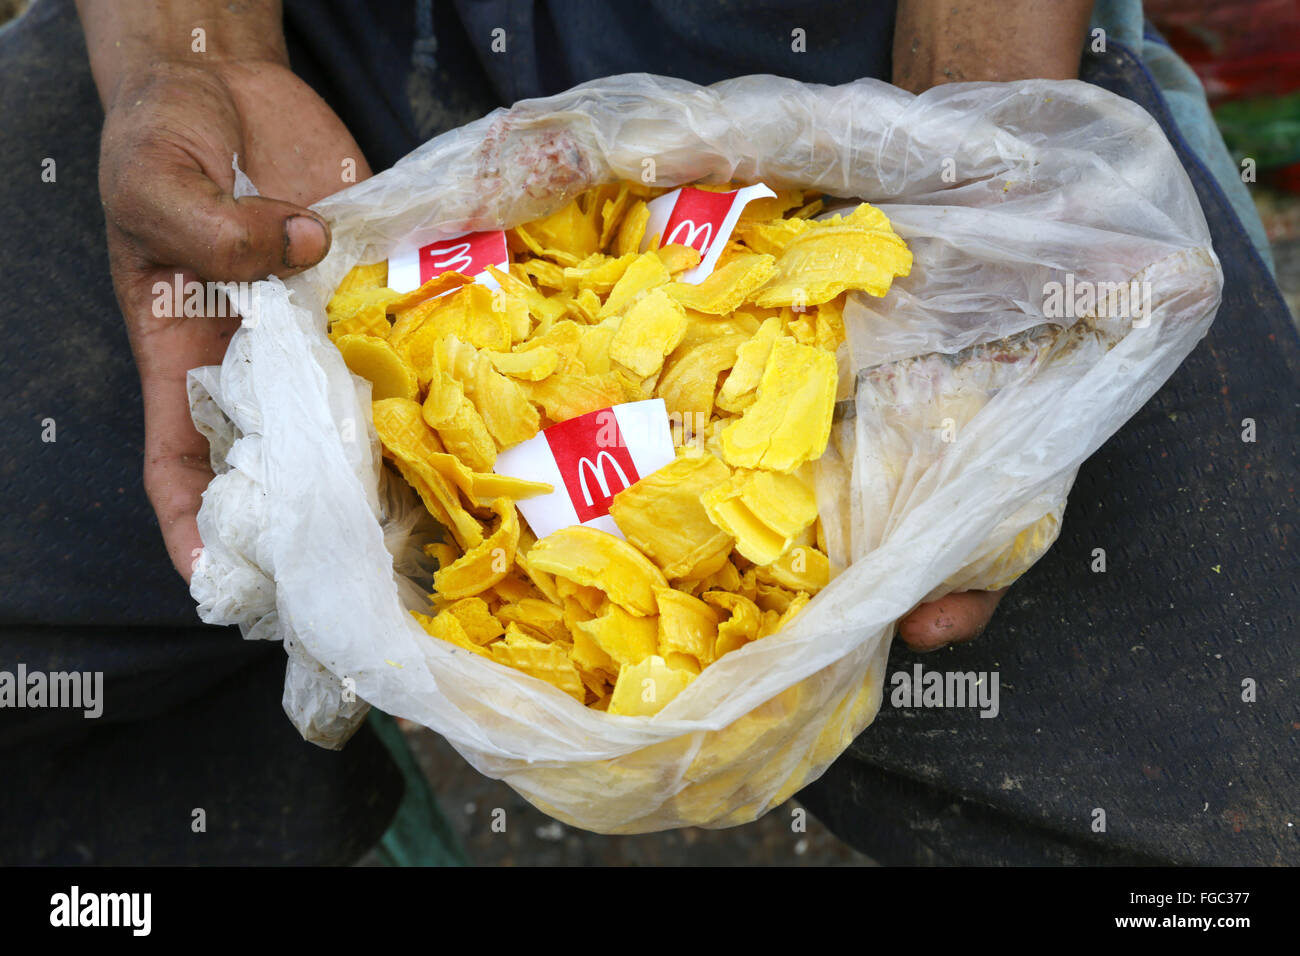 Young man eats leftover food from McDonalds found in waste at the landfill Quezon City 'Integrated Waste Disposal Facility' at Barangay (village) Payatas in Quezon City, Metro Manila, The Philippines Stock Photo